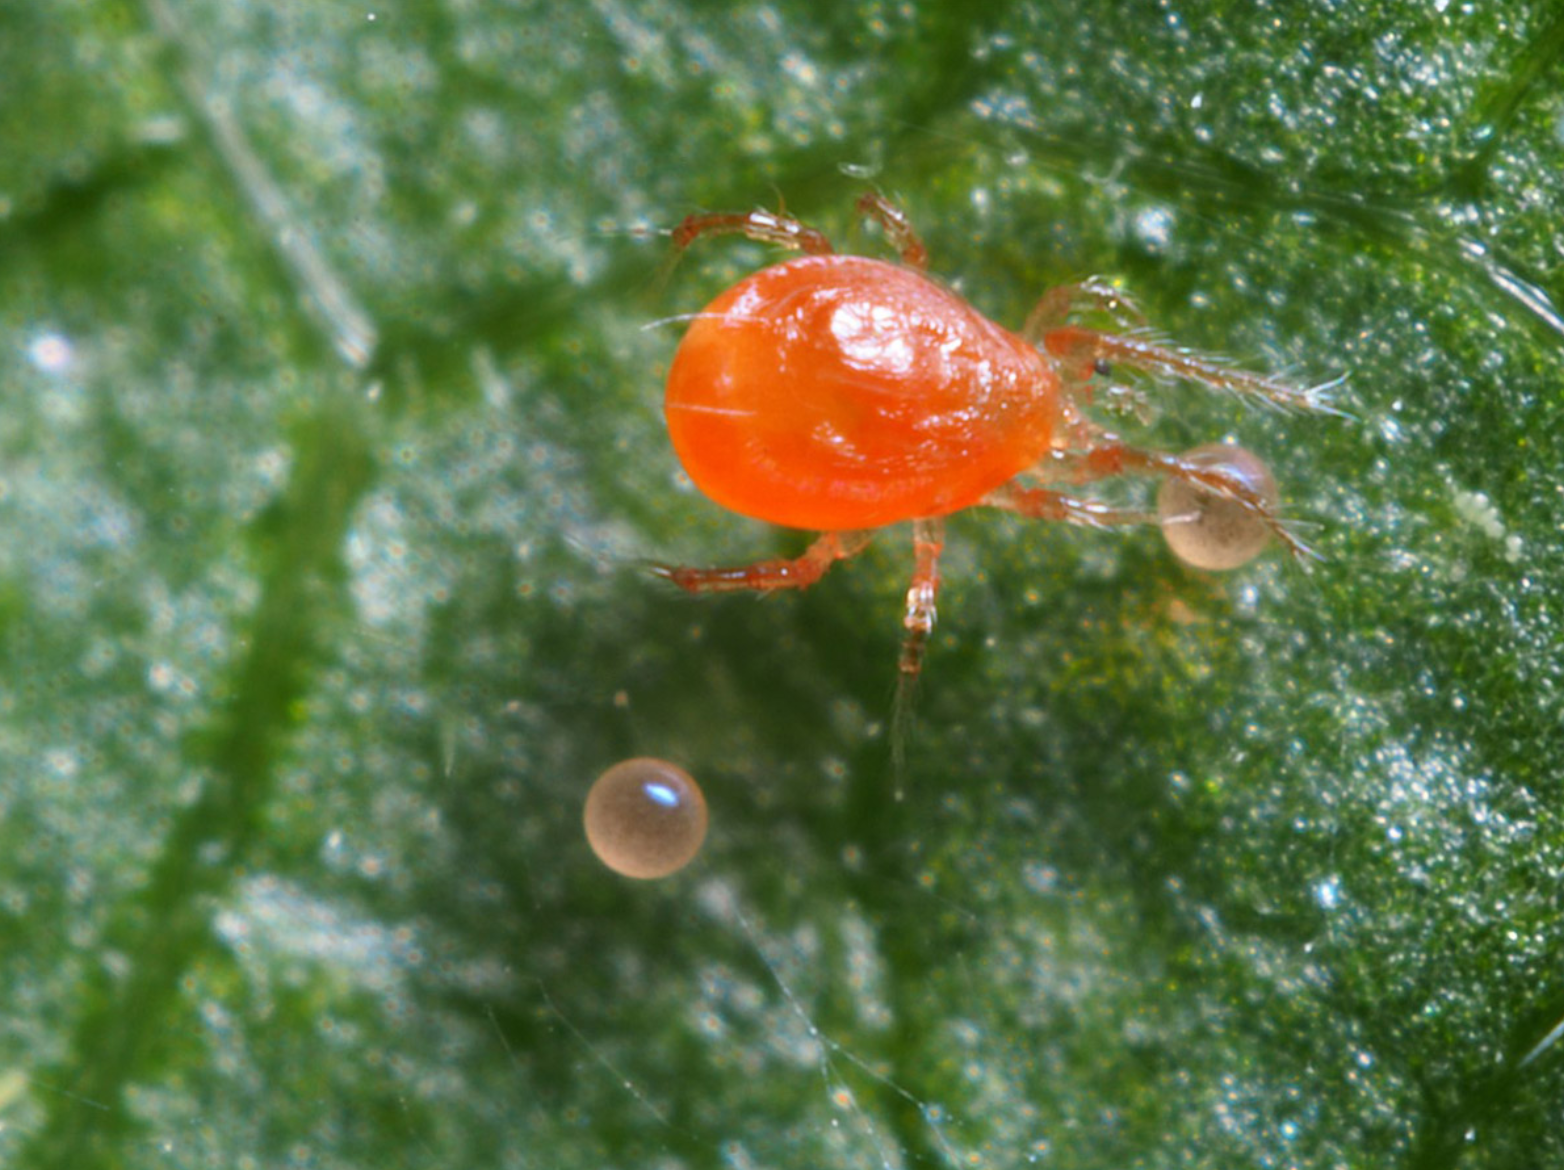 Image of Spider mites pests that can affect red flowers that bloom all summer